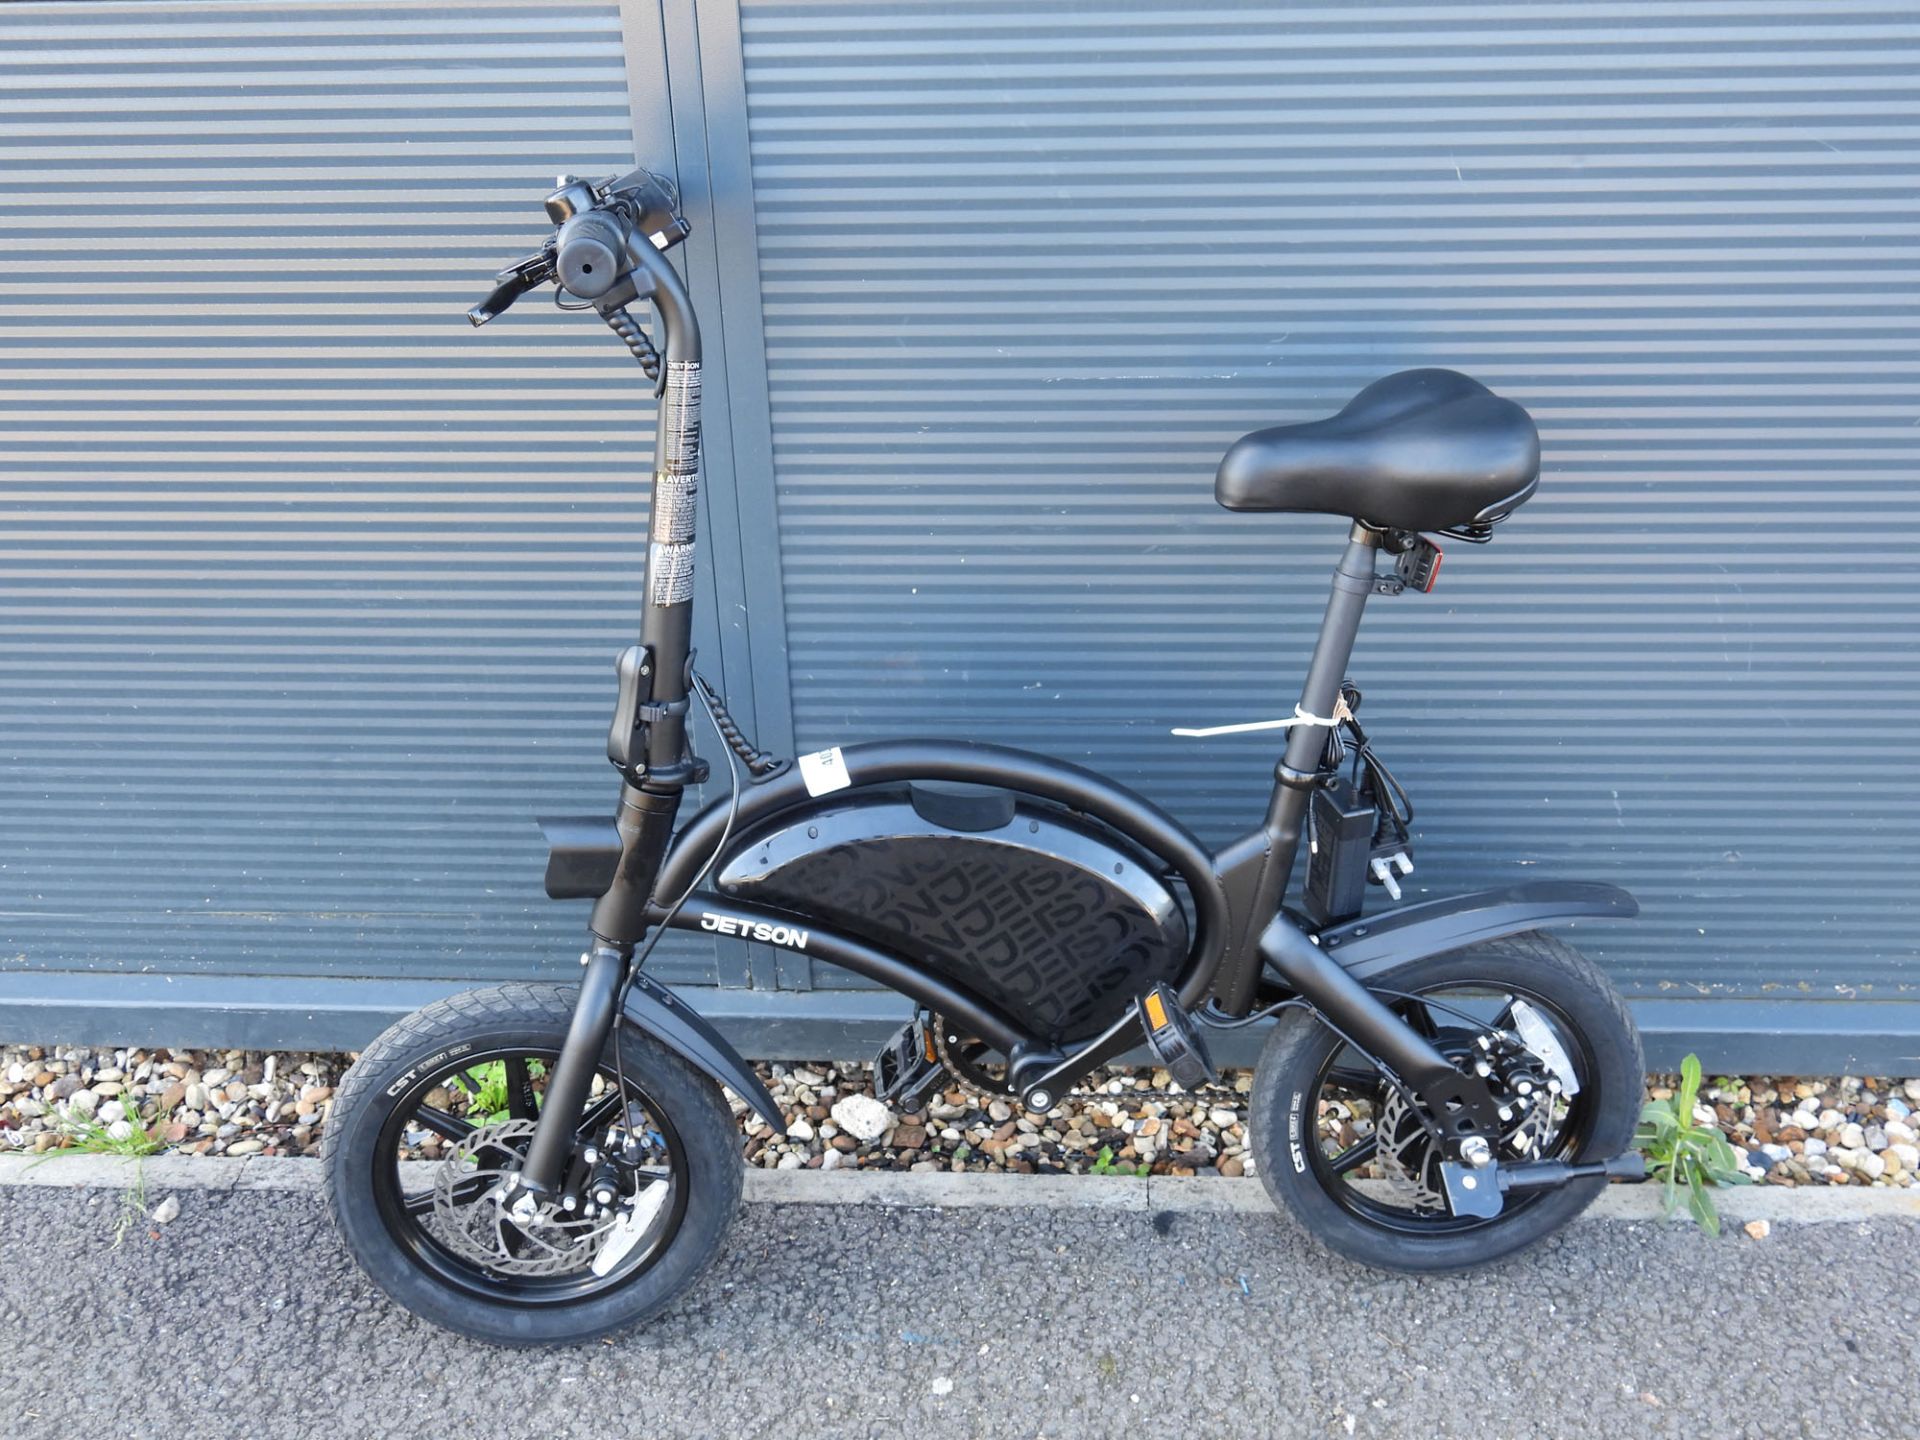 Jetson electric bike with charger